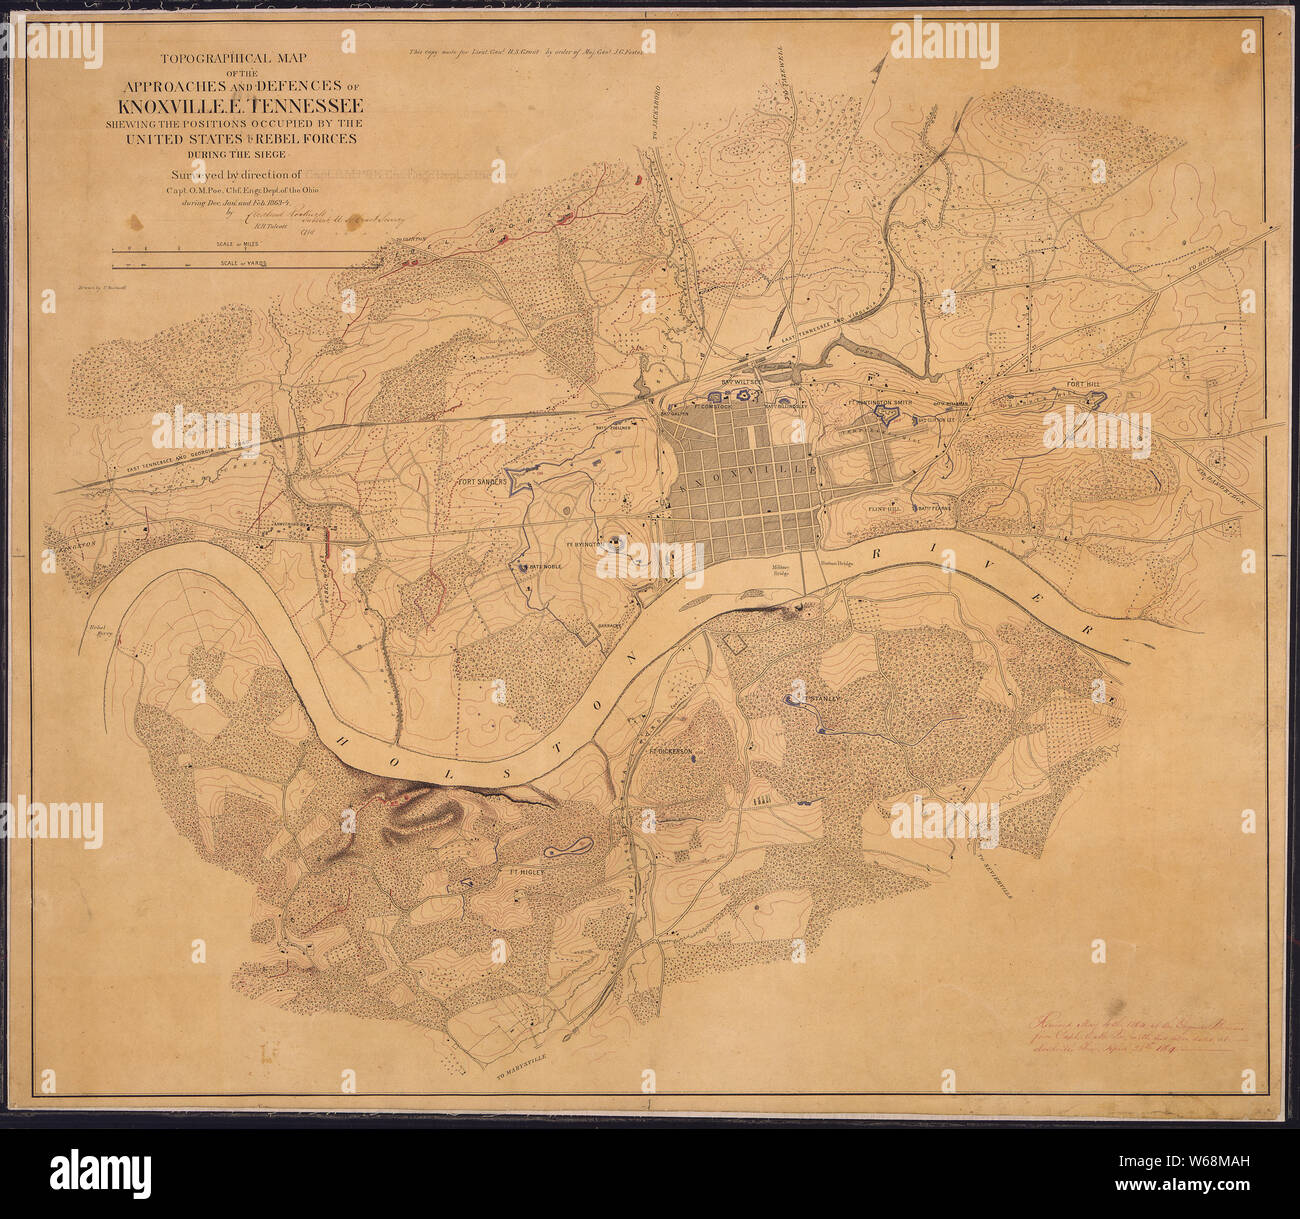 Topographical Map of the Approaches and Defenses of Knoxville, E. Tennessee, Shewing the Positions Occupied by the United States & Rebel Forces during the Siege. Surveyed by direction of Capt. O. M. Poe, Chf. Engr., Dept. of the Ohio, during Dec., Jan., and Feb., 1863-4, by [signed] Cleveland Rockwell, Sub. Asst., U.S. Coast Survey, [and] R. H. Talcott, Aid ... Drawn by C. Rockwell. Stock Photo